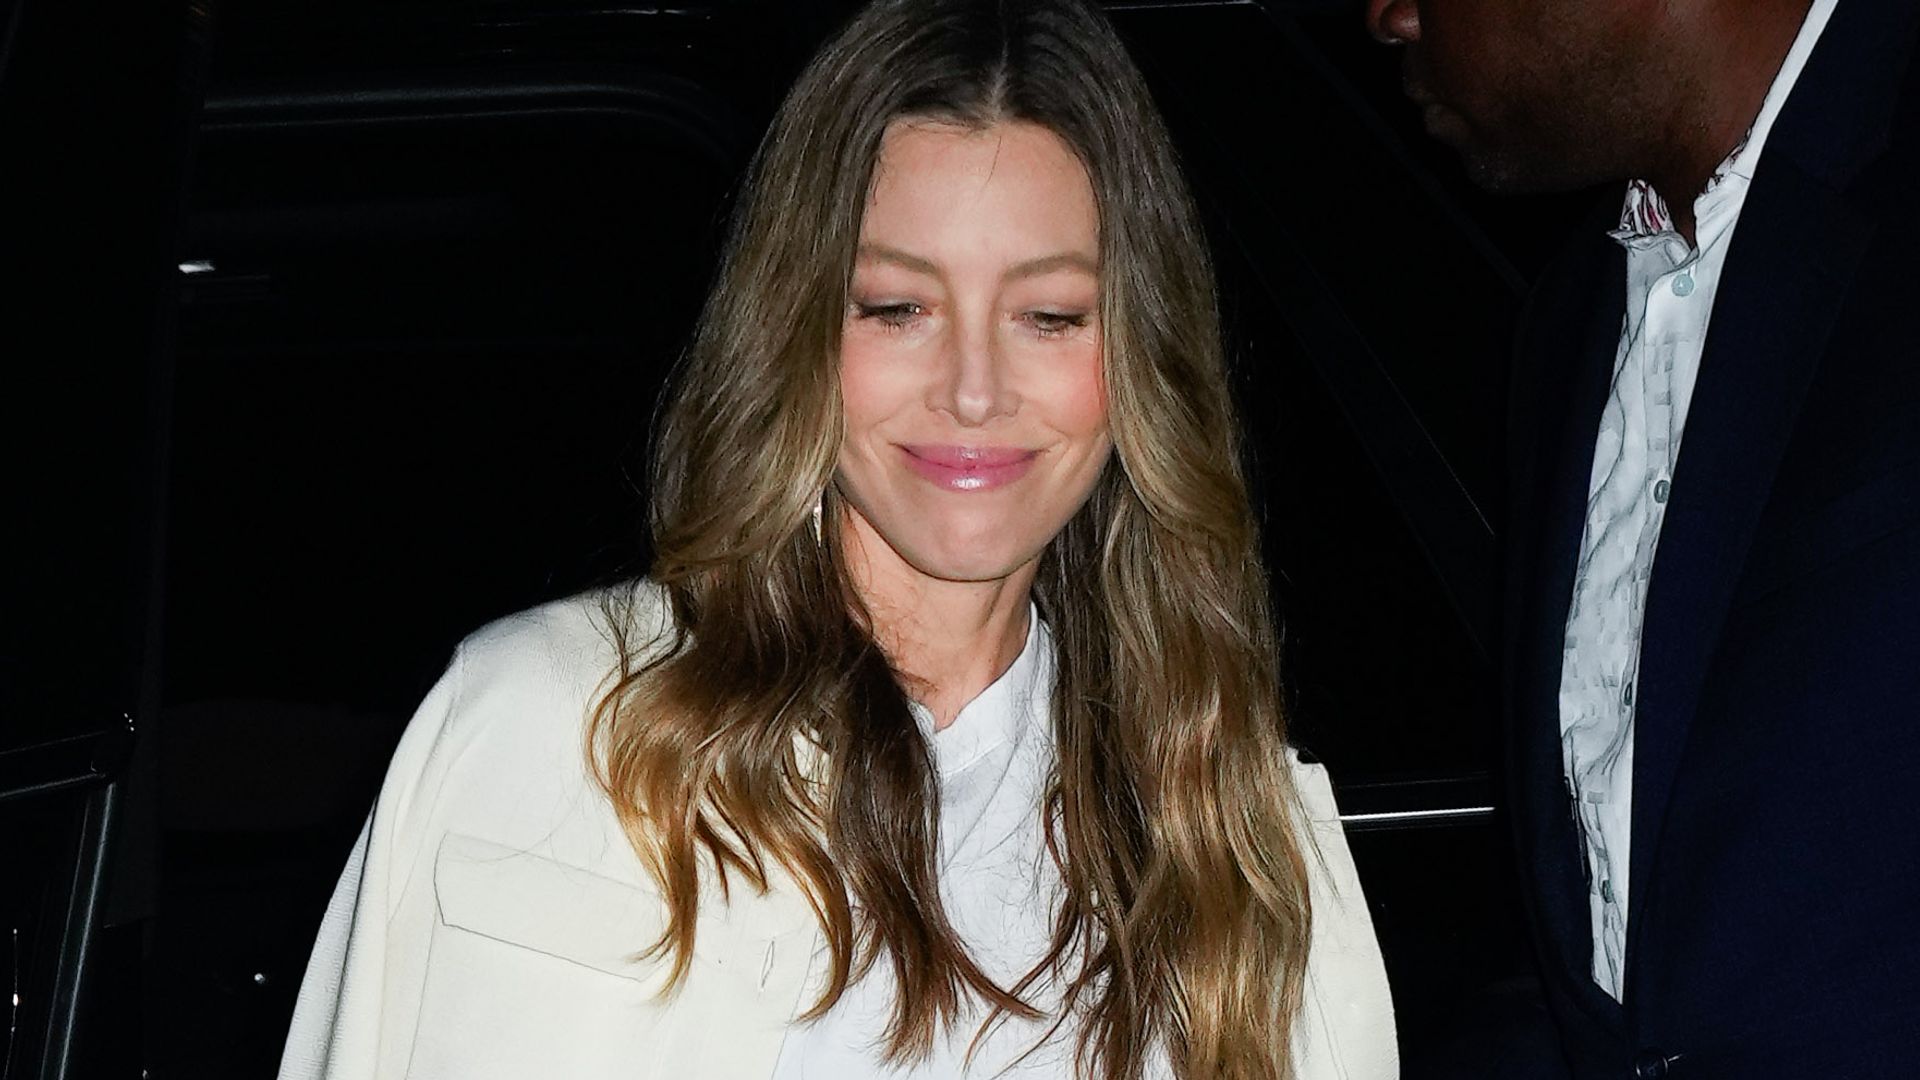 Jessica Biel and Justin Timberlake Stepped Out for a Rare Couple's